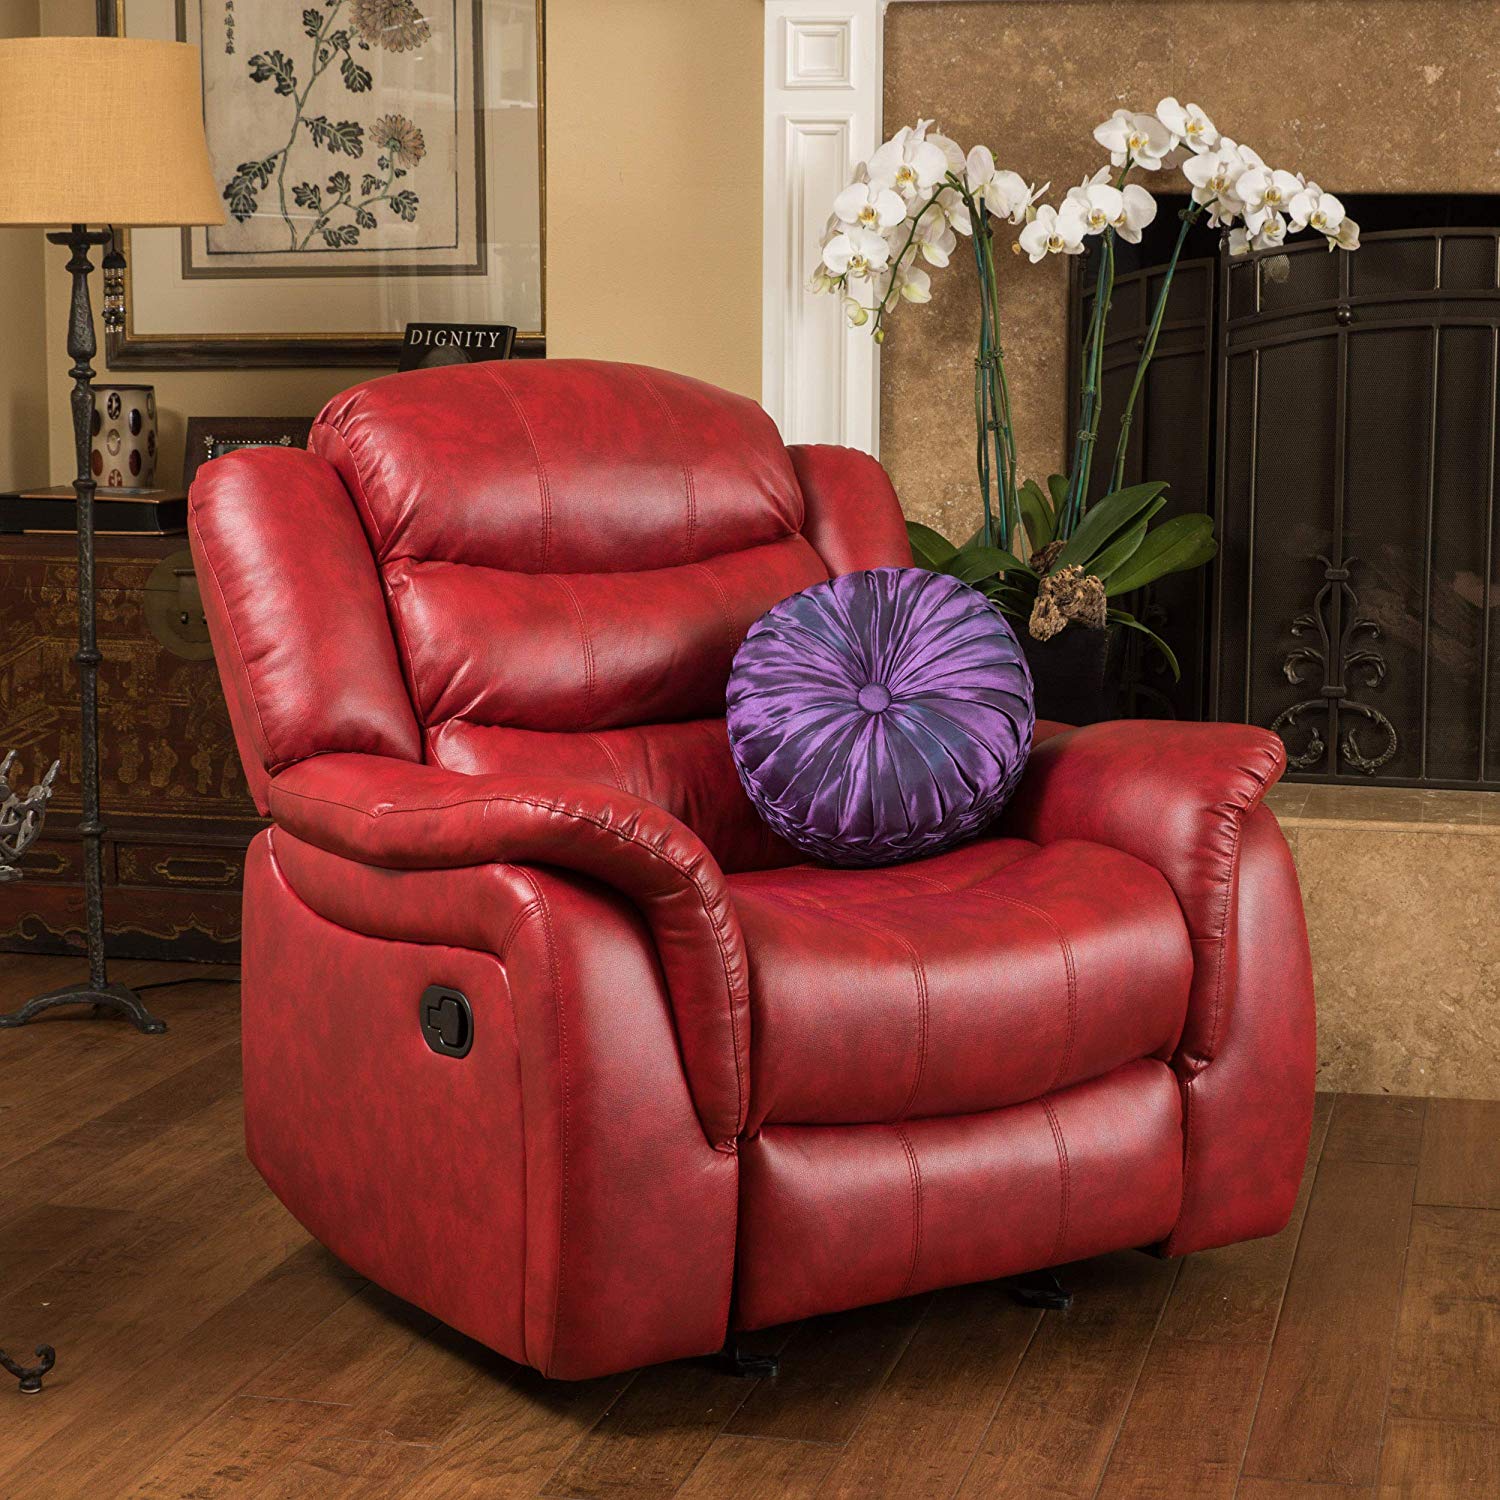 Top 10 Red Leather Recliner Chairs - 2020 Reviews & Guide • Recliners Guide